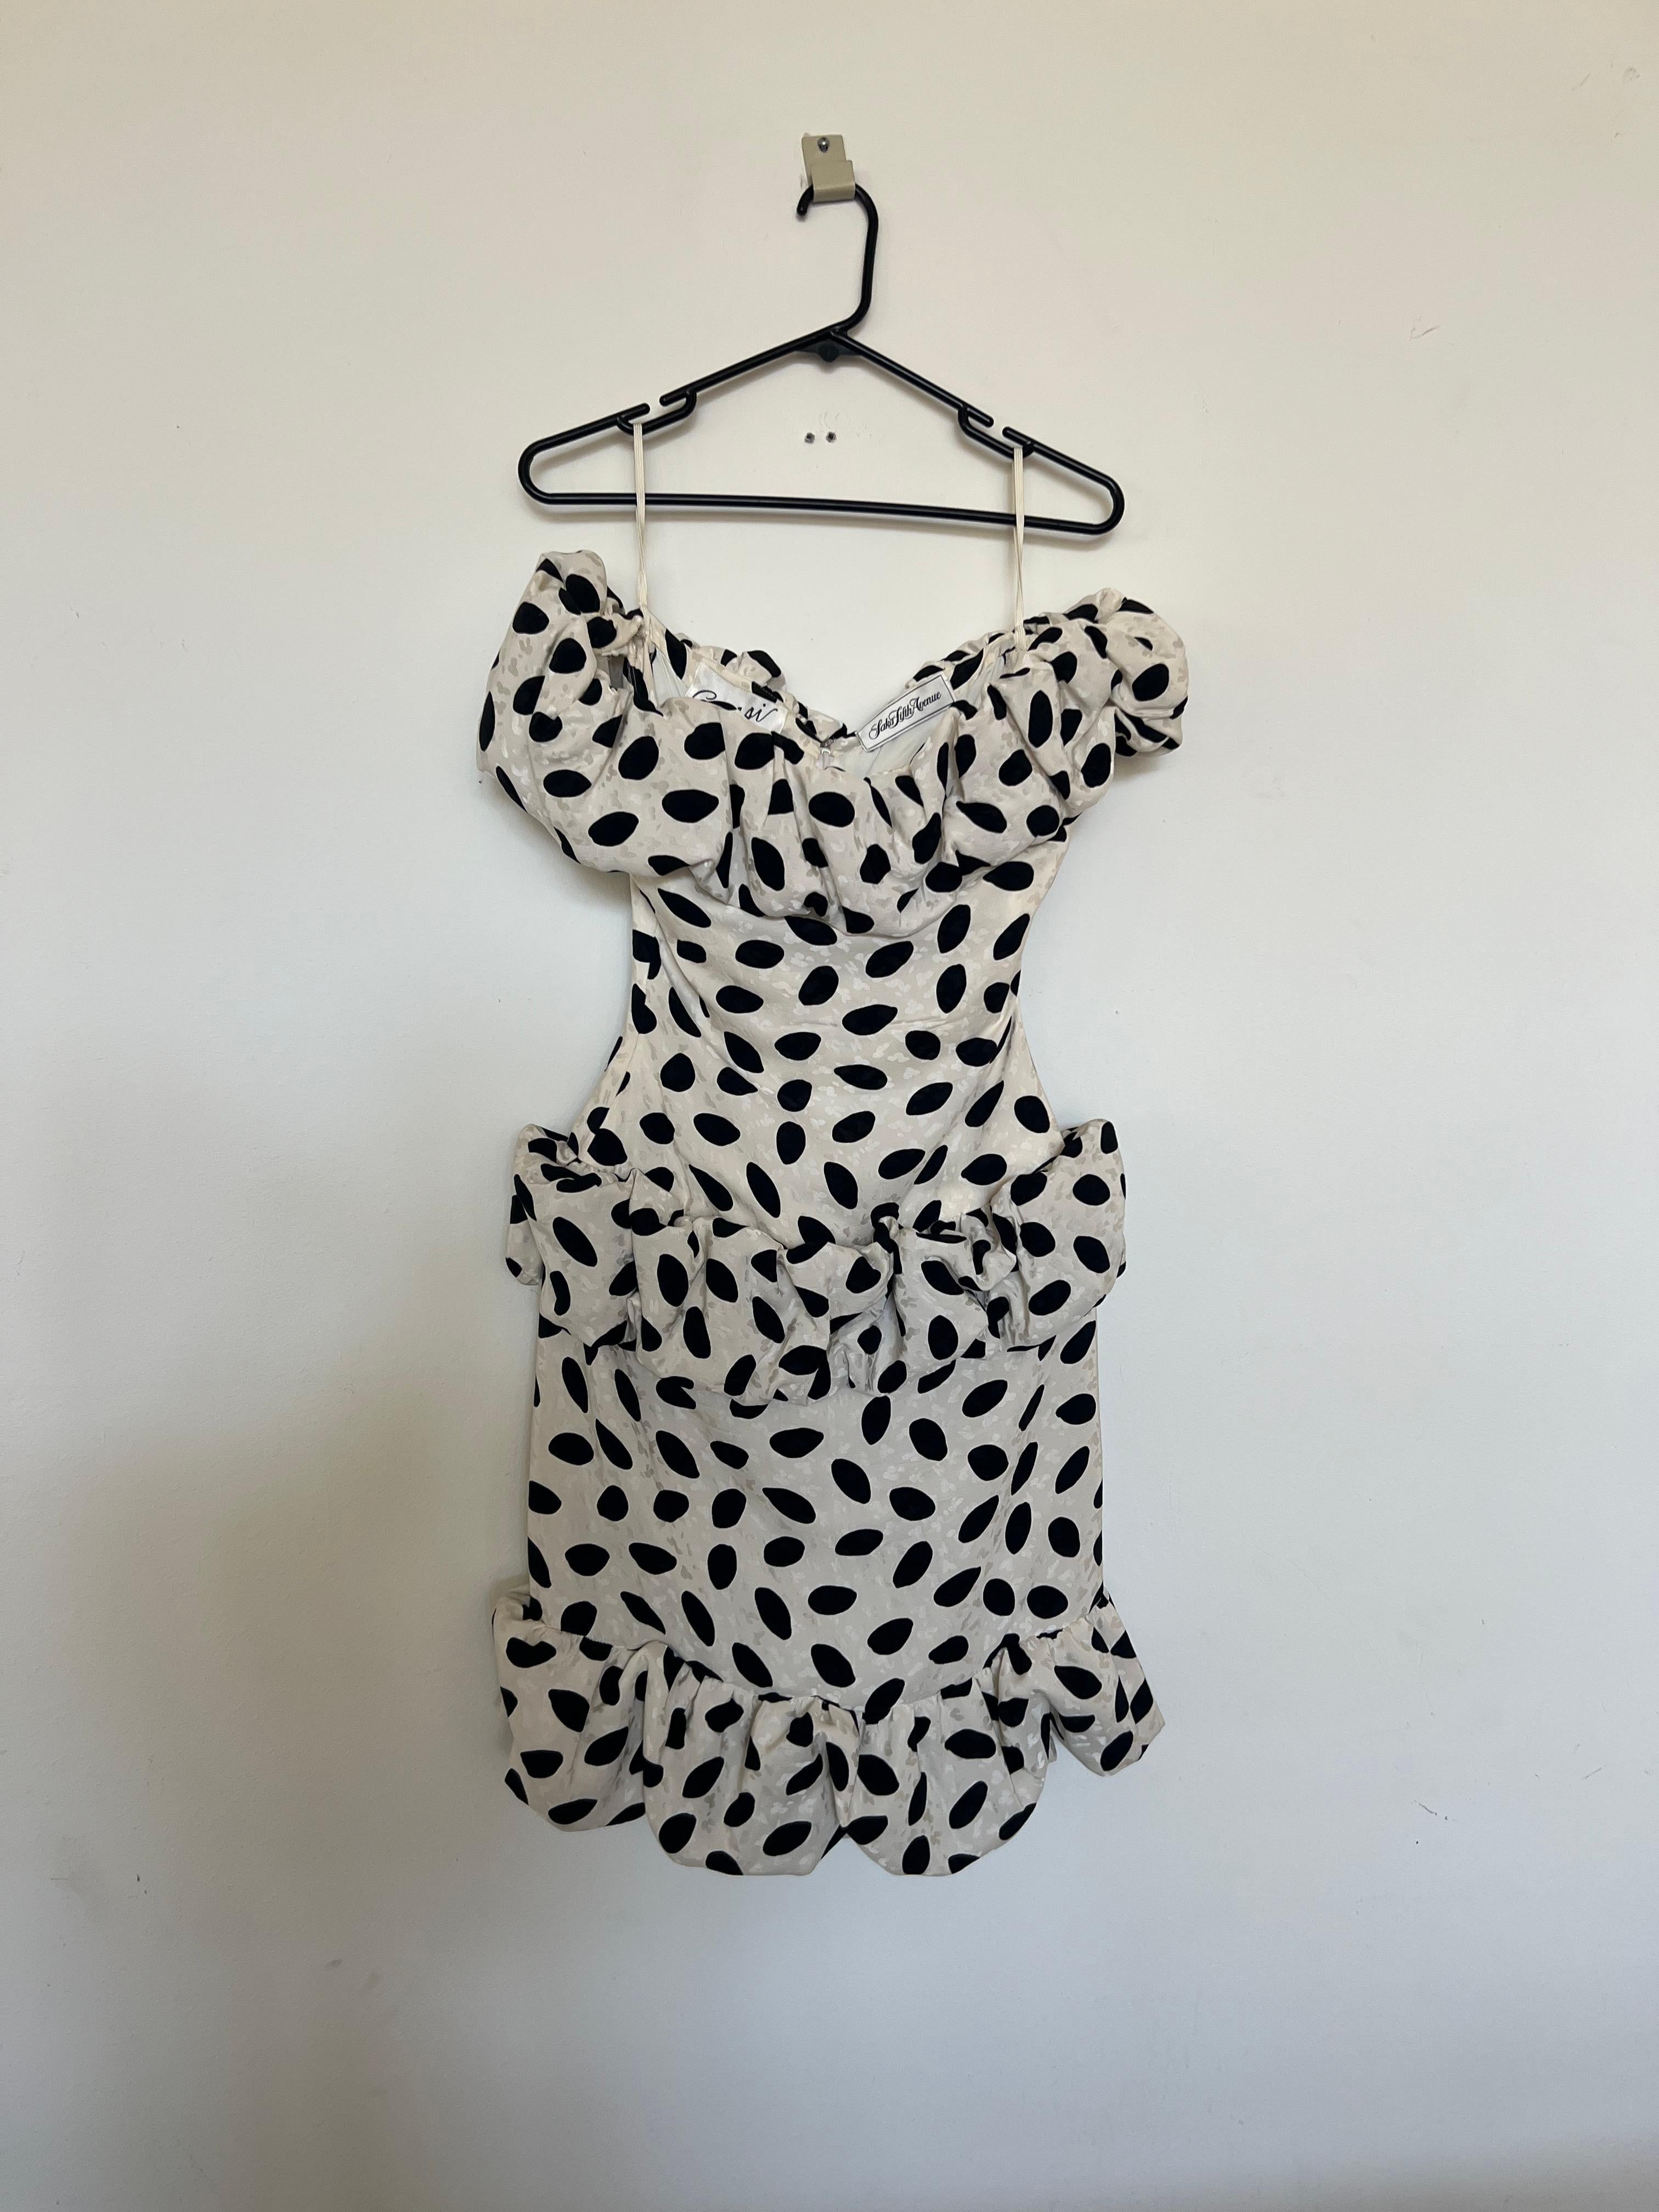 VINTAGE 80'S ARNOLD SCAASI DRESS COCKTAIL GOWN w/POLKA DOTS & BLACK ROSES In Good Condition For Sale In Matthews, NC